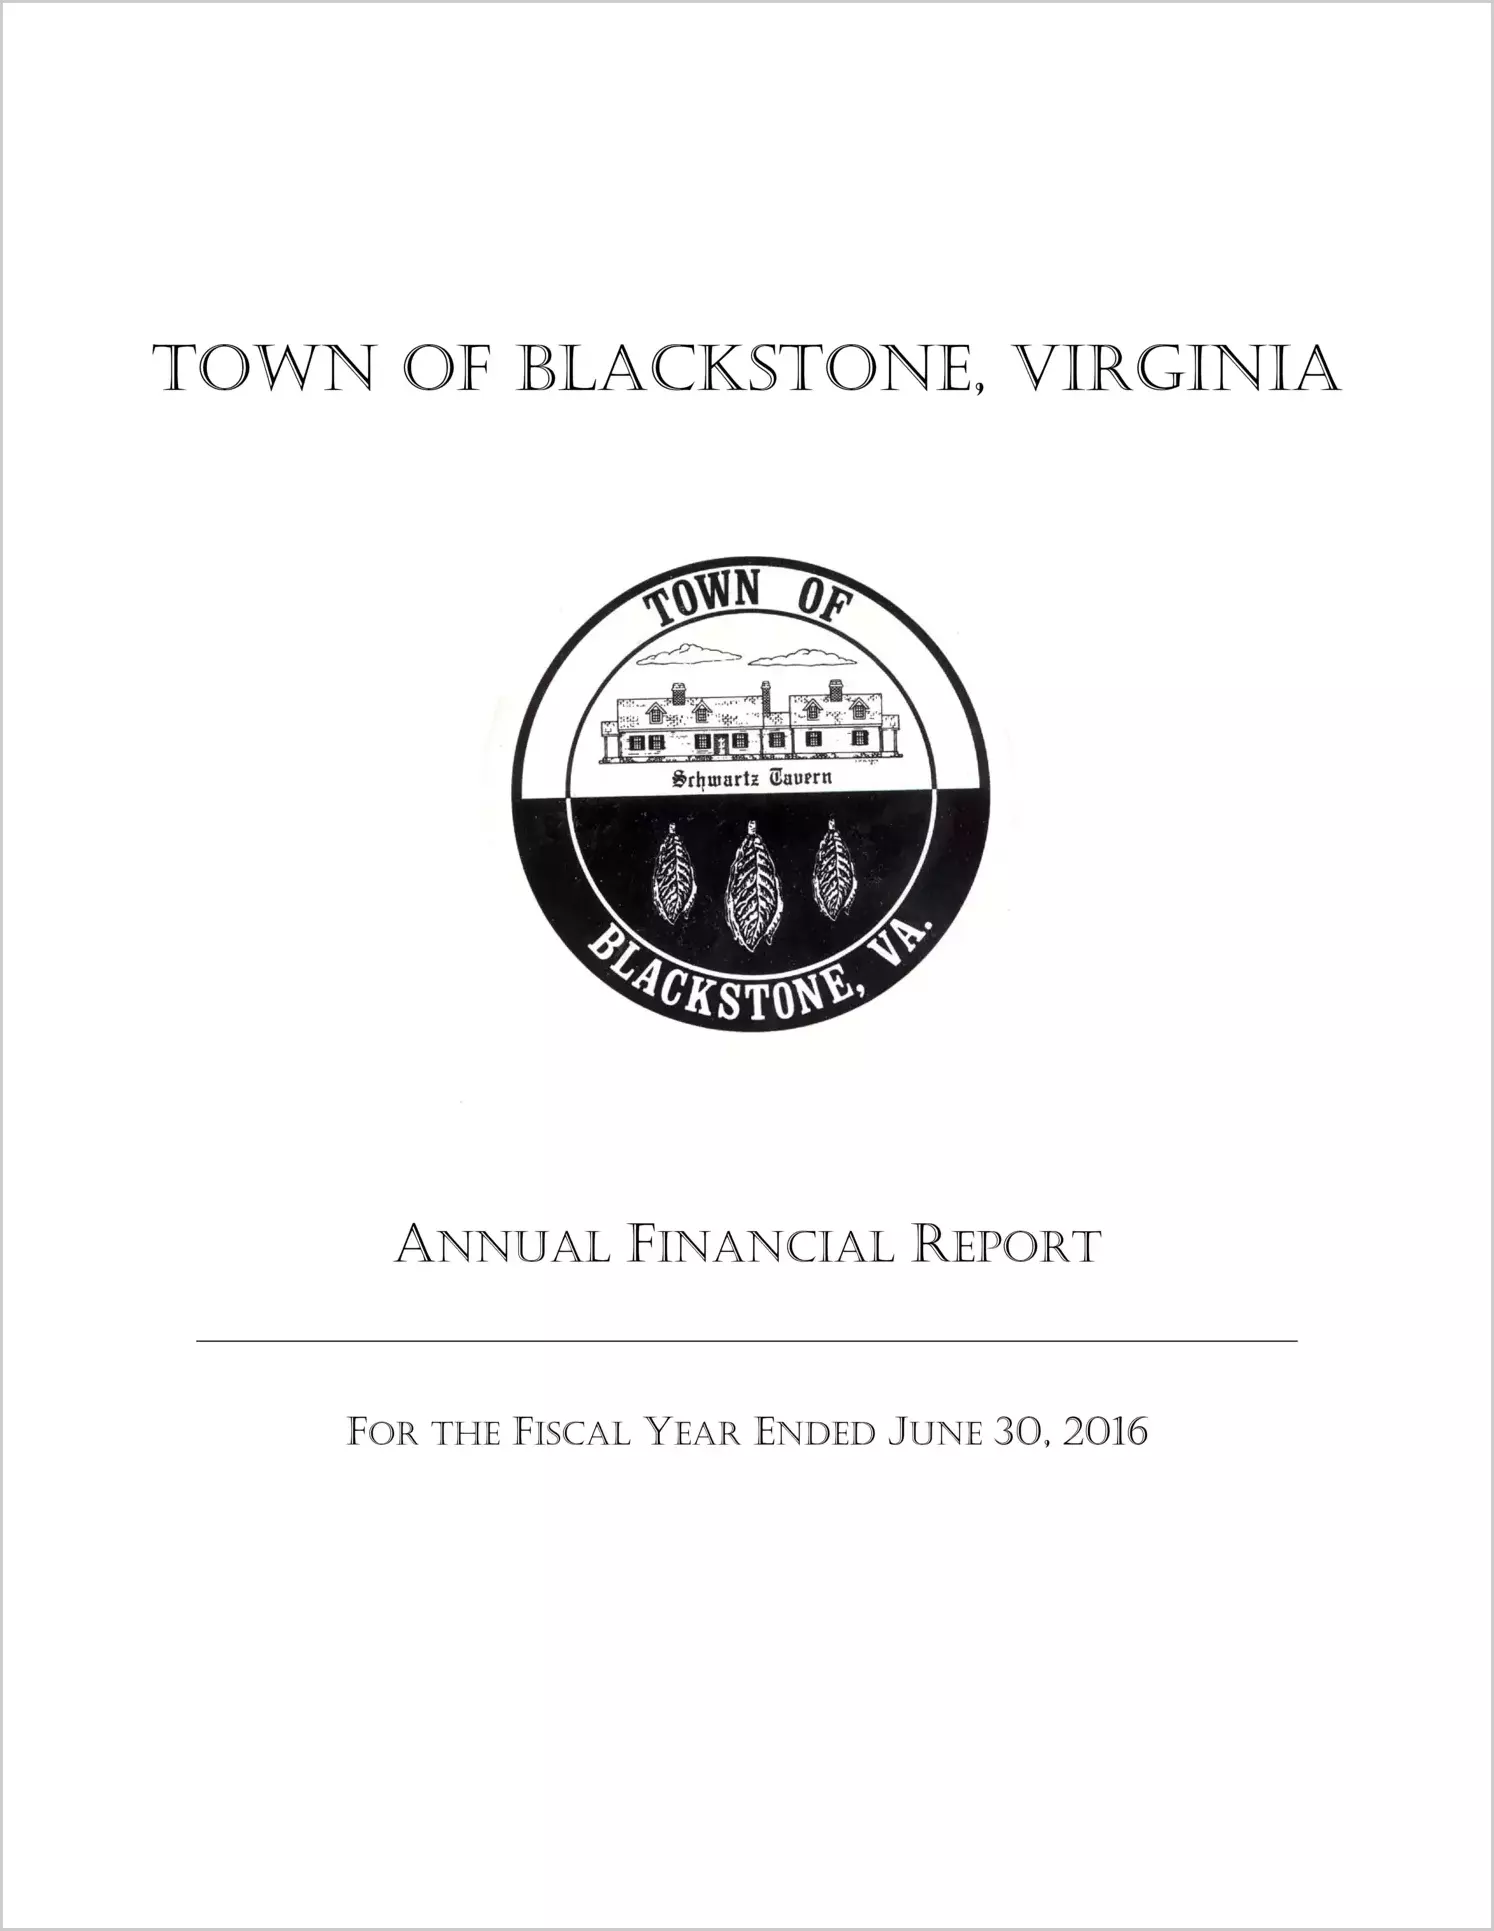 2016 Annual Financial Report for Town of Blackstone